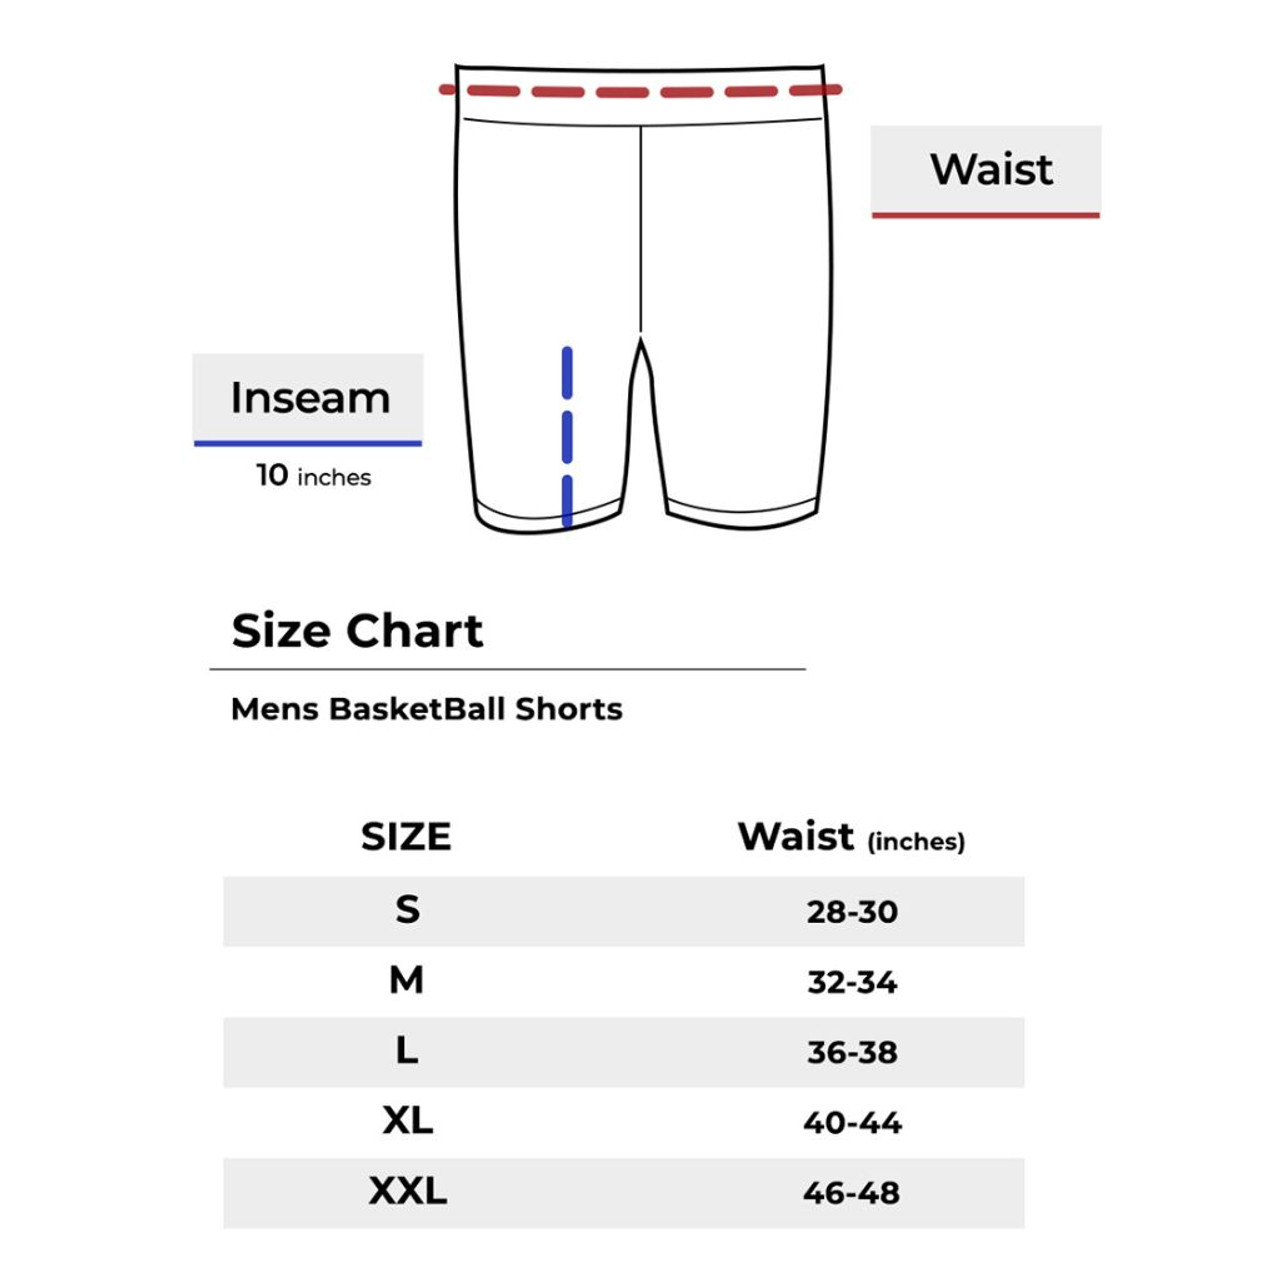 Men's Active Moisture-Wicking Mesh Shorts (2- or 3-Pack) product image